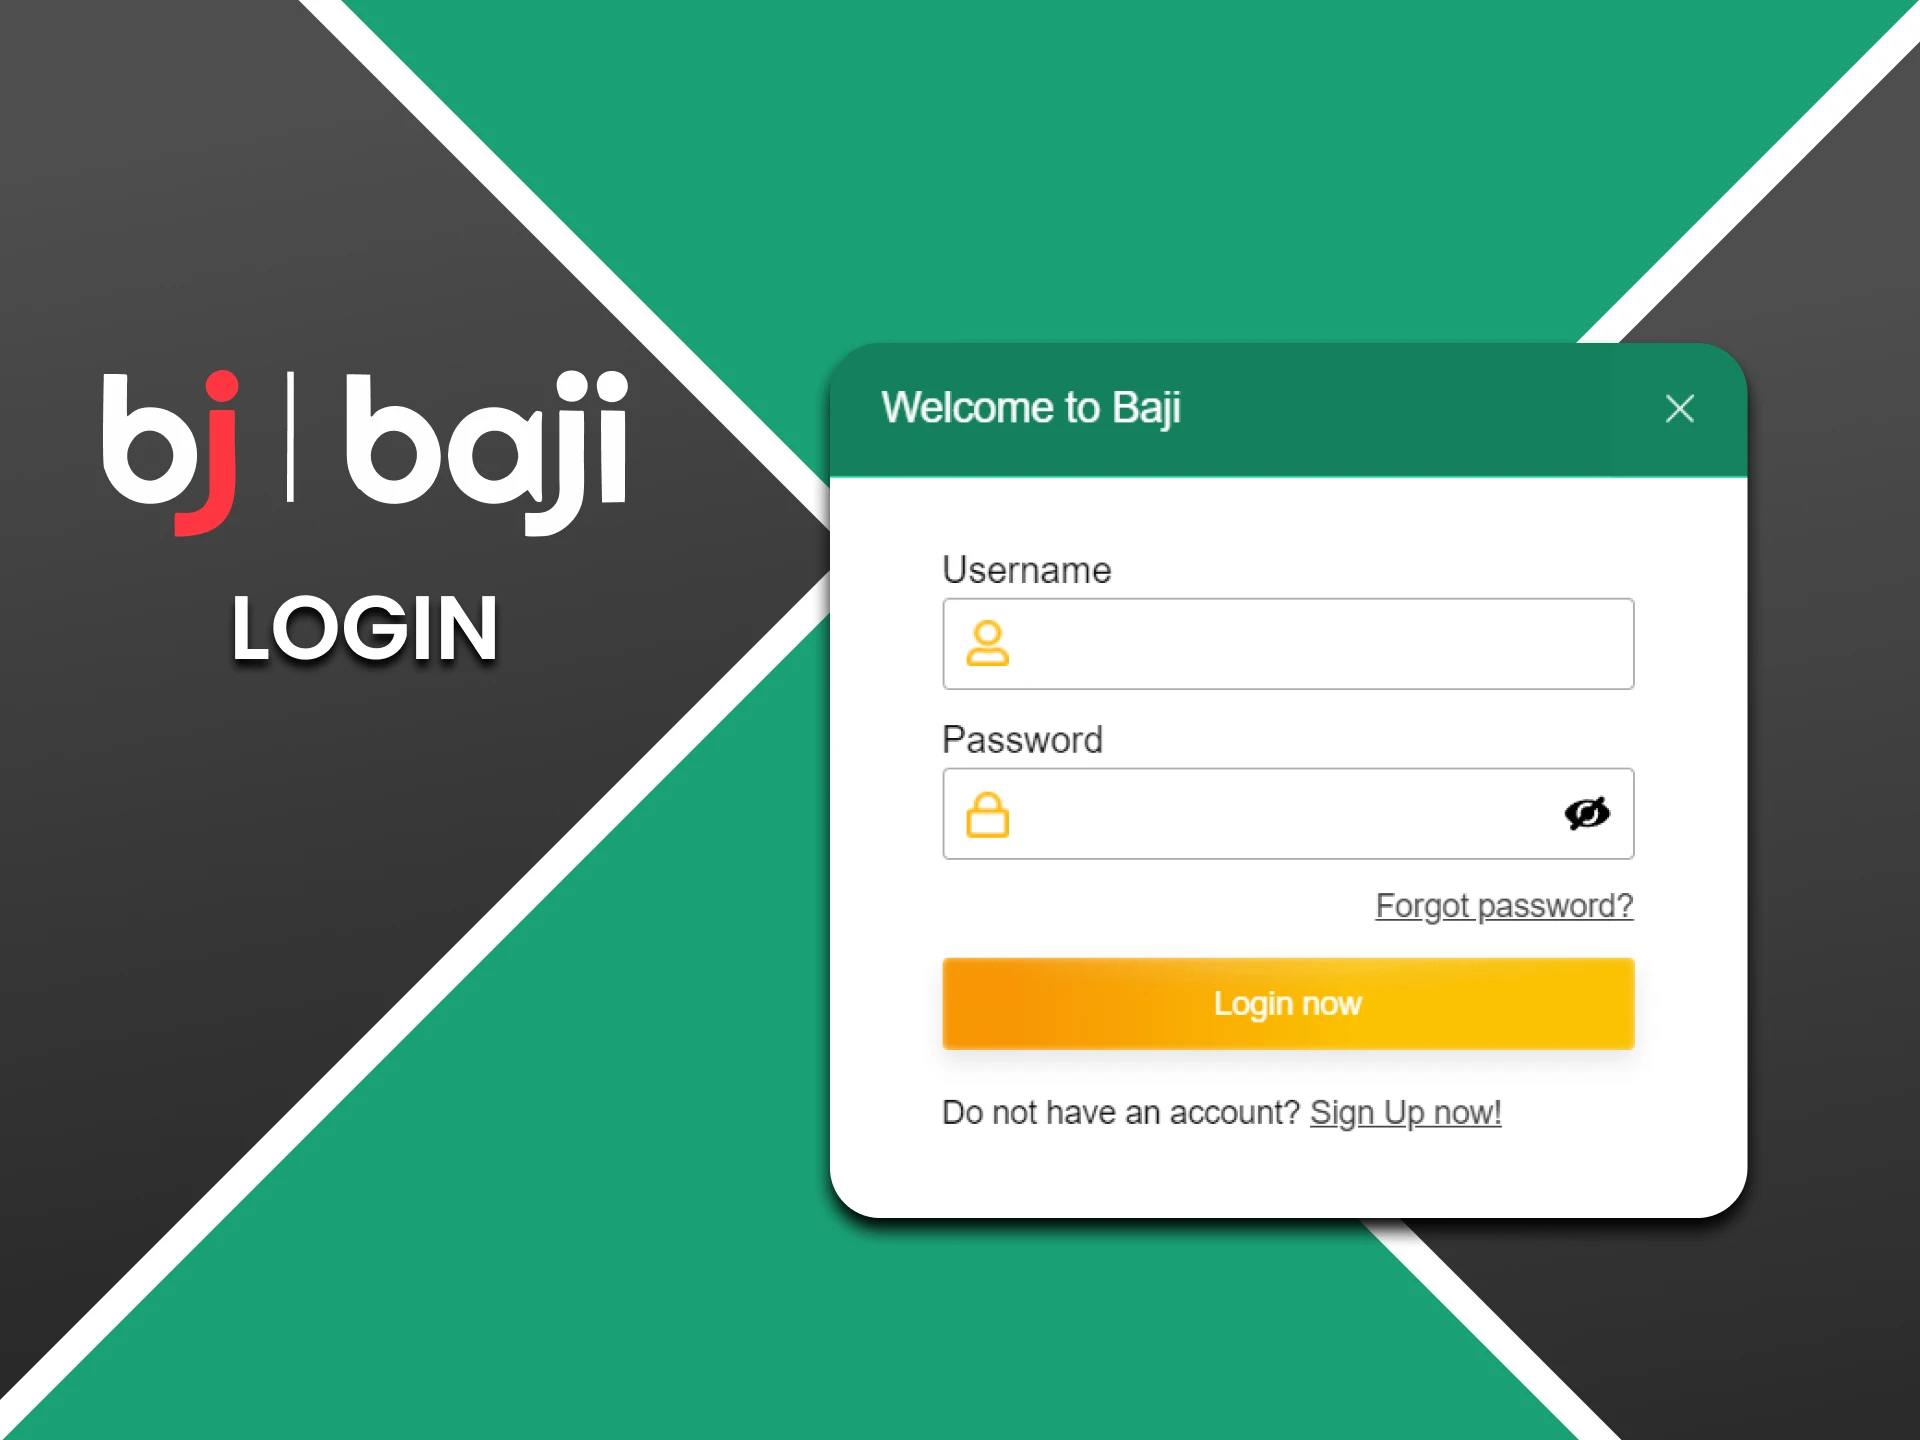 You can log into your account on the Baji website.